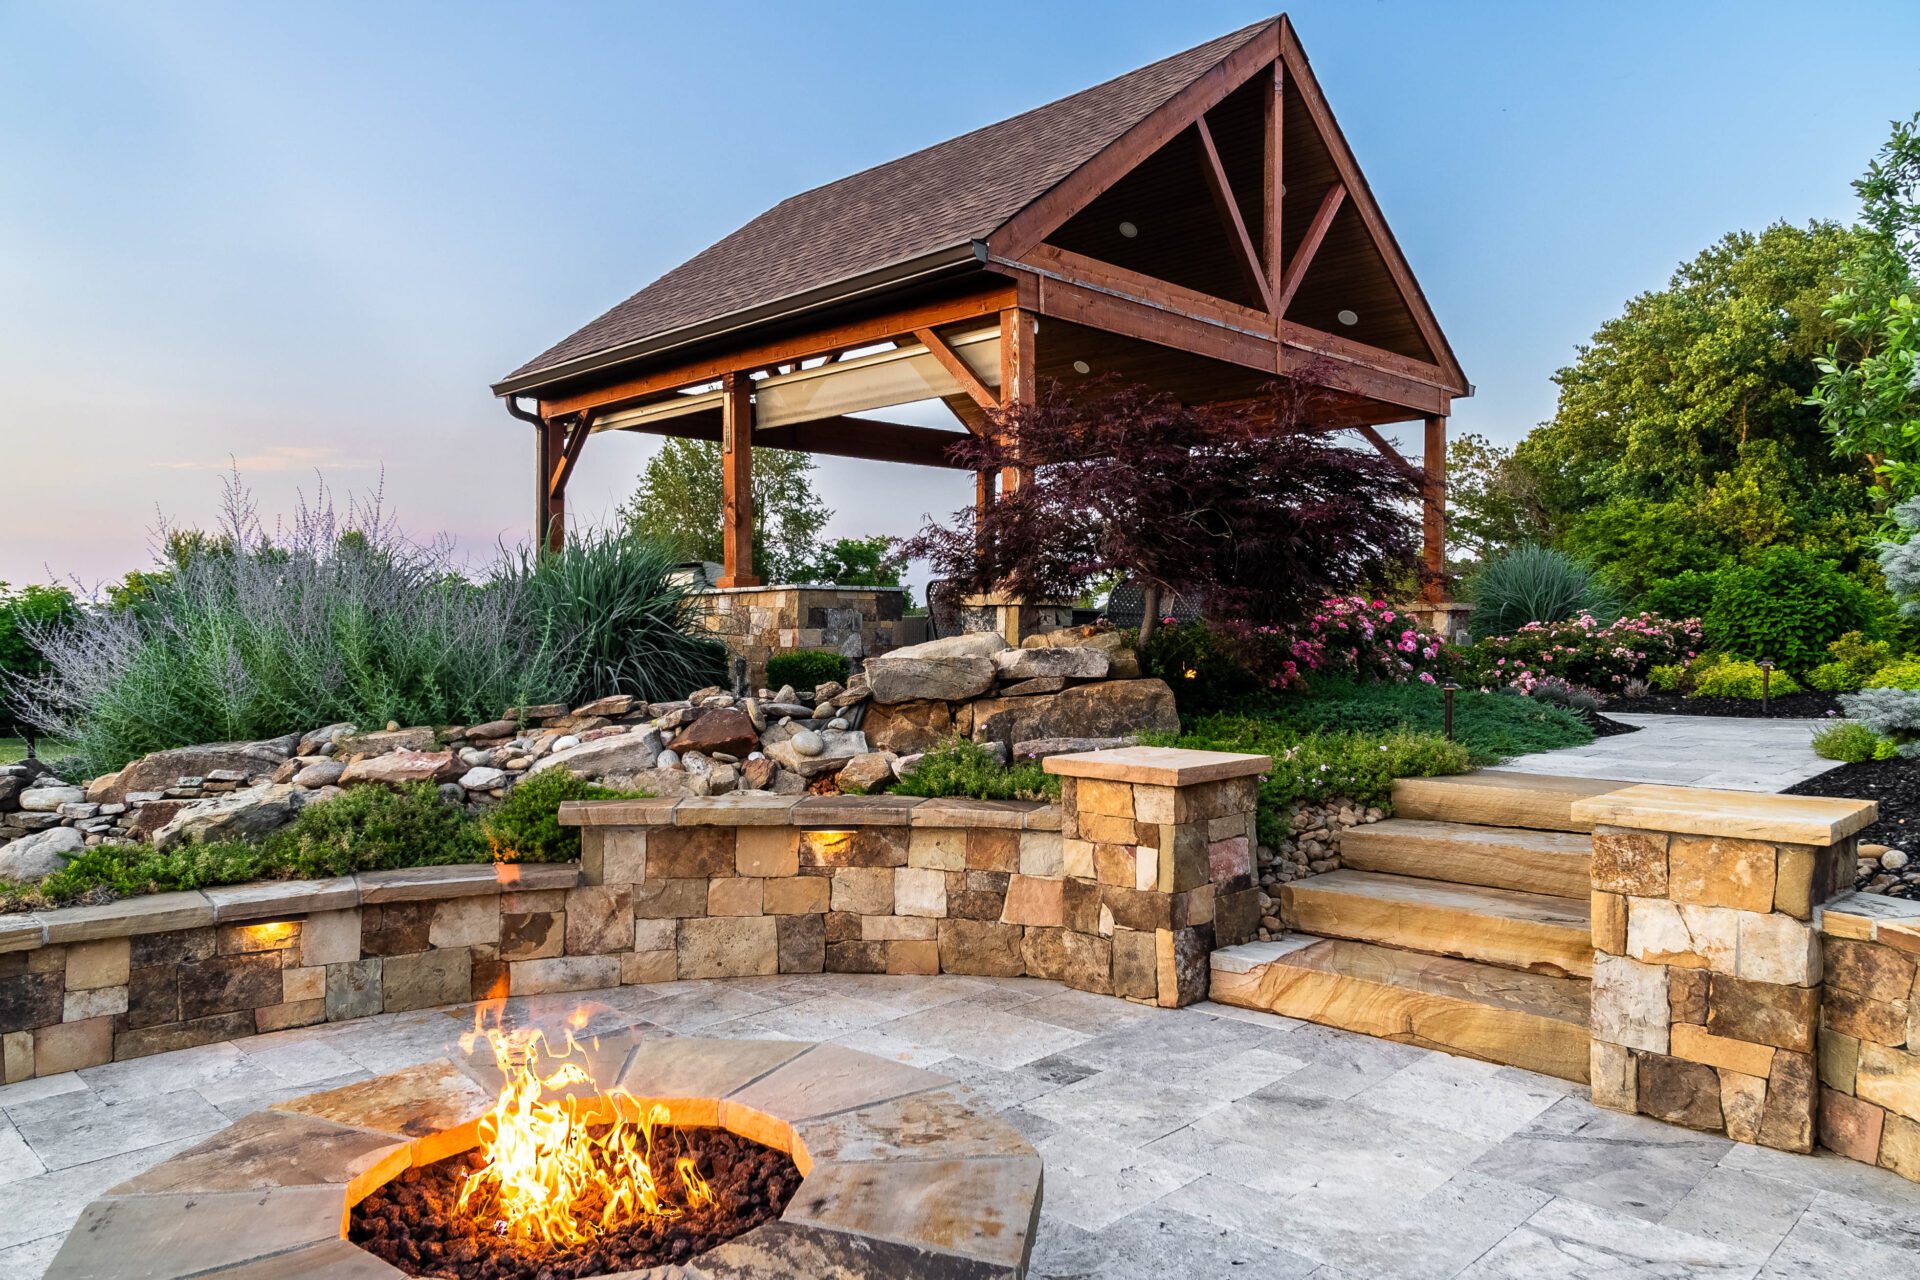 Patio construction from our hardscaping and landscaping design experts in Nashville, TN